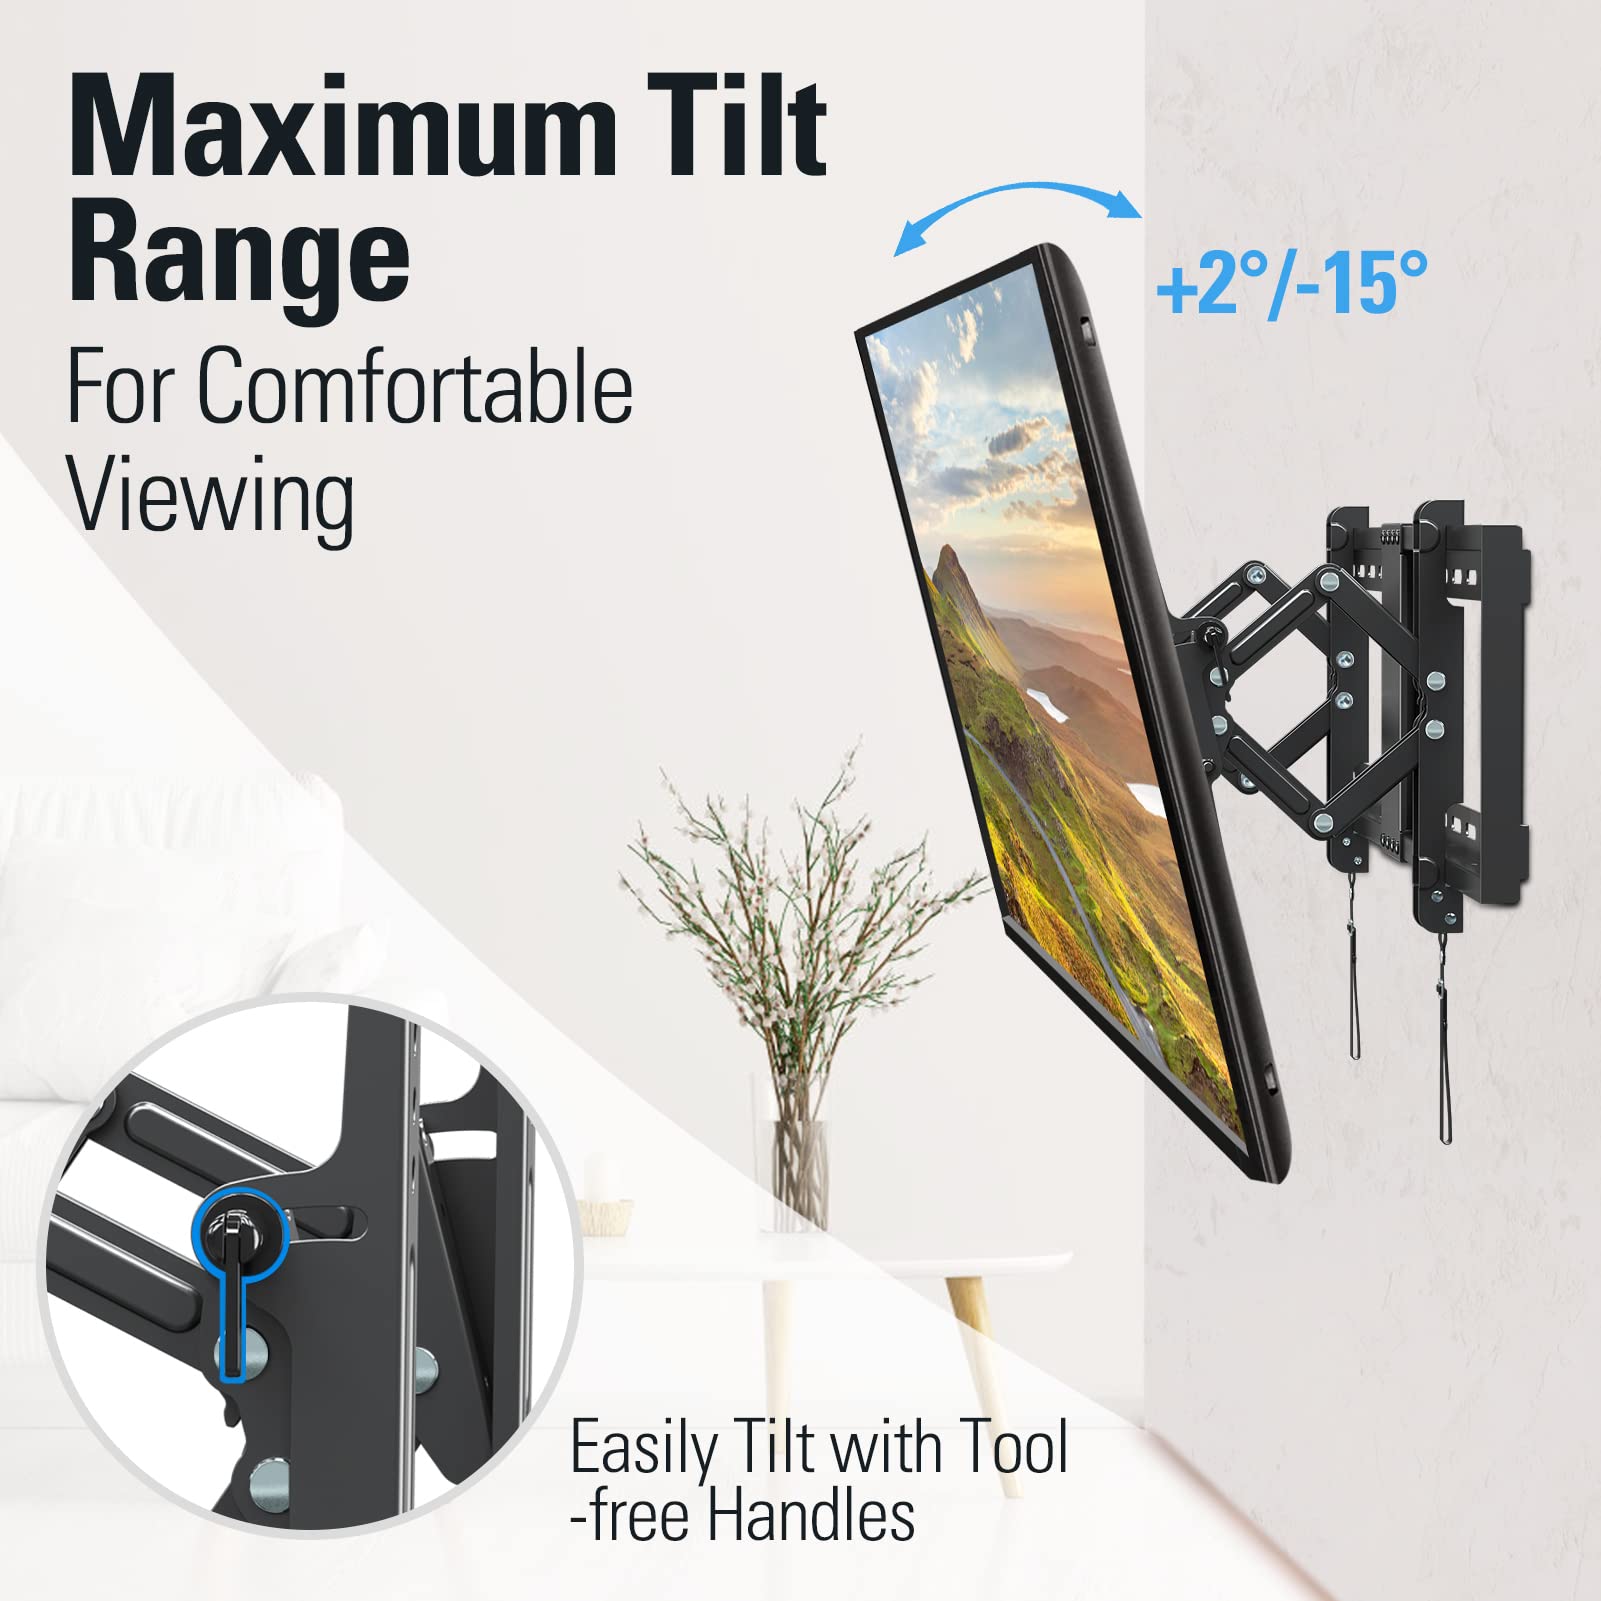 Mounting Dream UL Listed Advanced Tilt TV Wall Mount for Most 42-90 Inch TVs MD2104 and Ultra Slim Full Motion TV Wall Mount for Most 26-75 Inch TVs, up to 88lbs MD2801-M